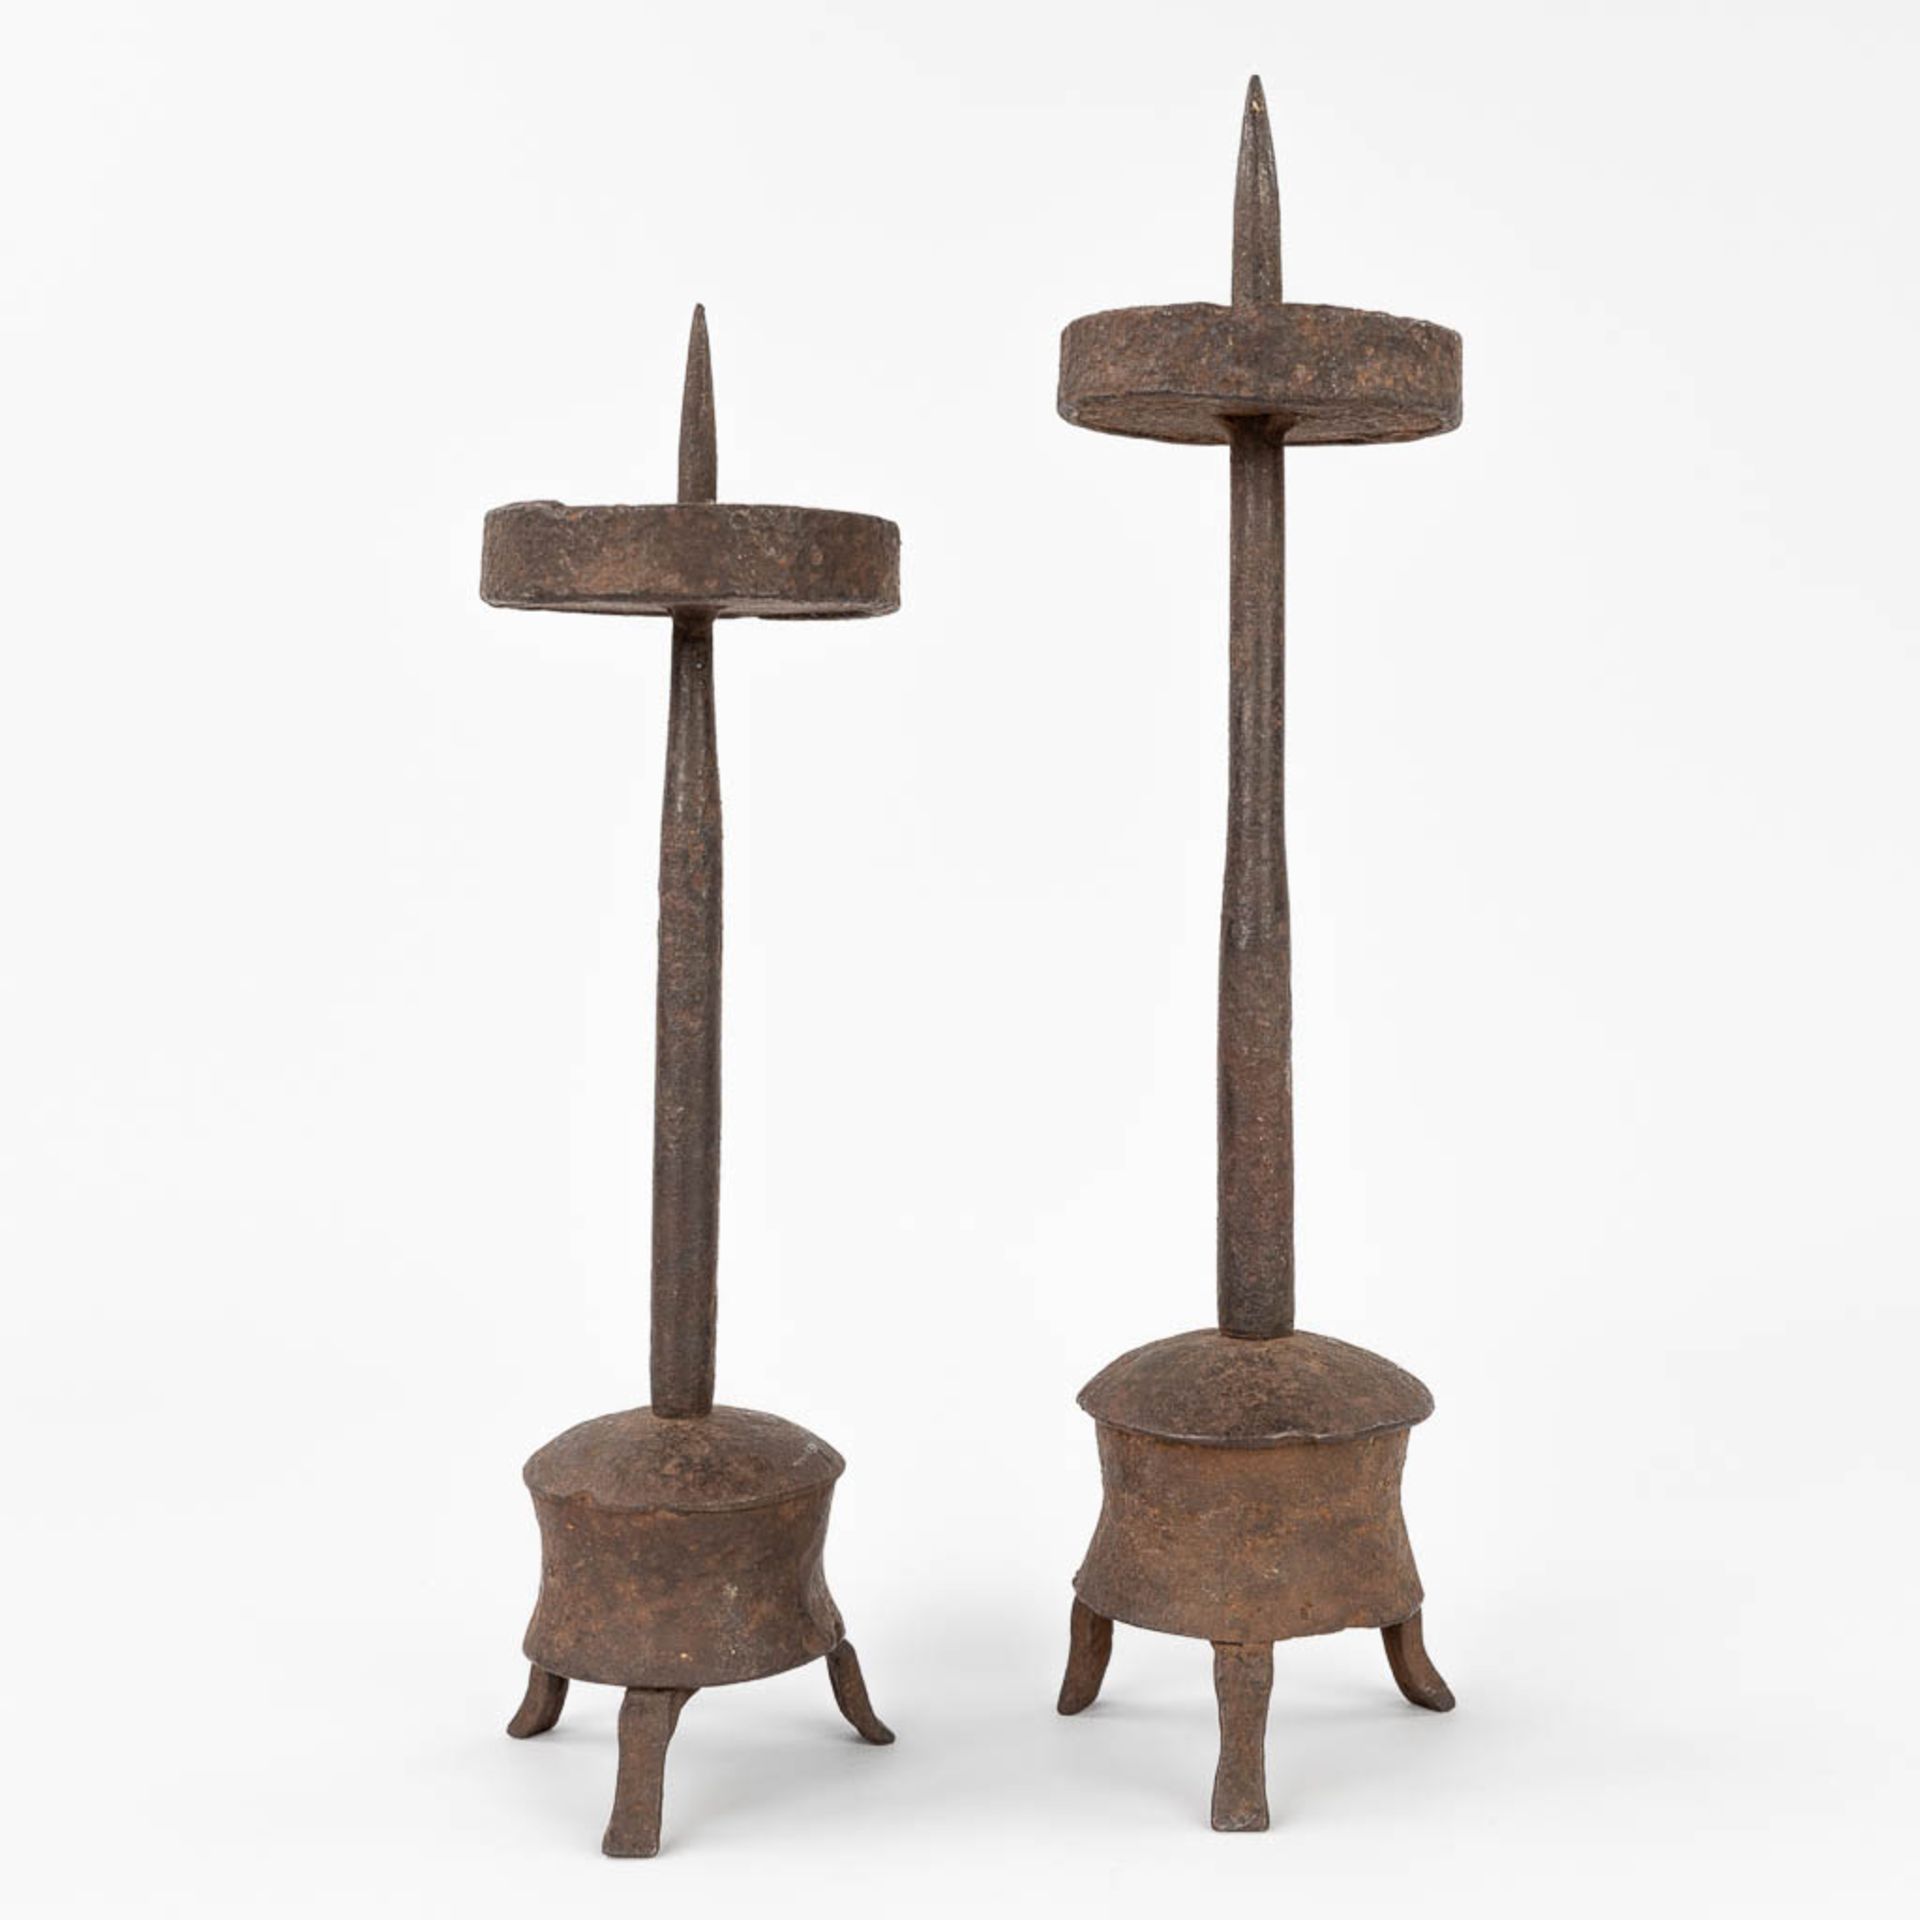 A pair of antique candlesticks made of wrought iron. Probably made in Southern Europe. (H:34 cm) - Image 4 of 16